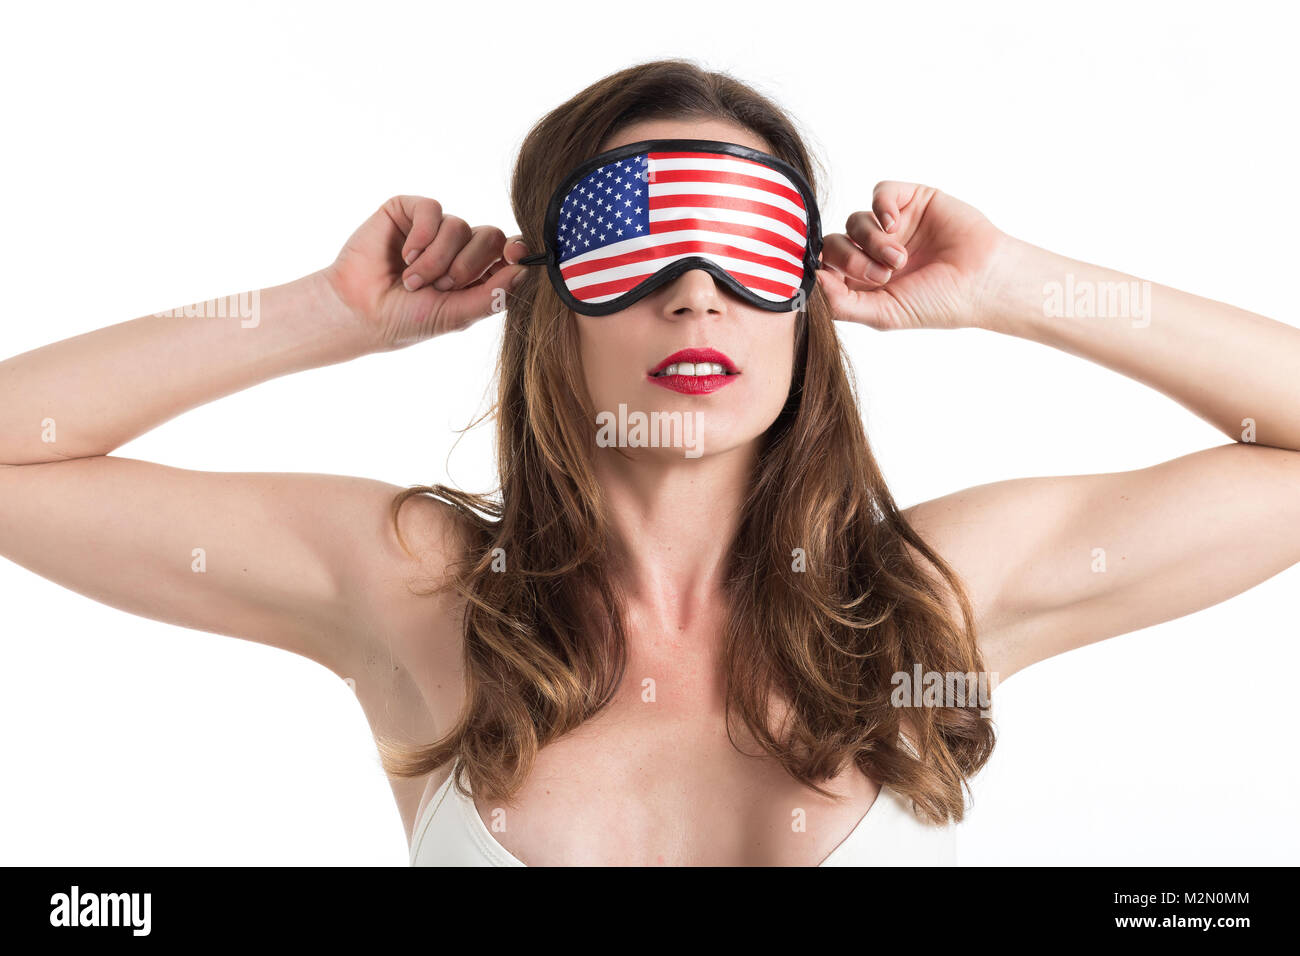 Young woman wearing eyemask. American Dream concept. Isolated on white background. Stock Photo